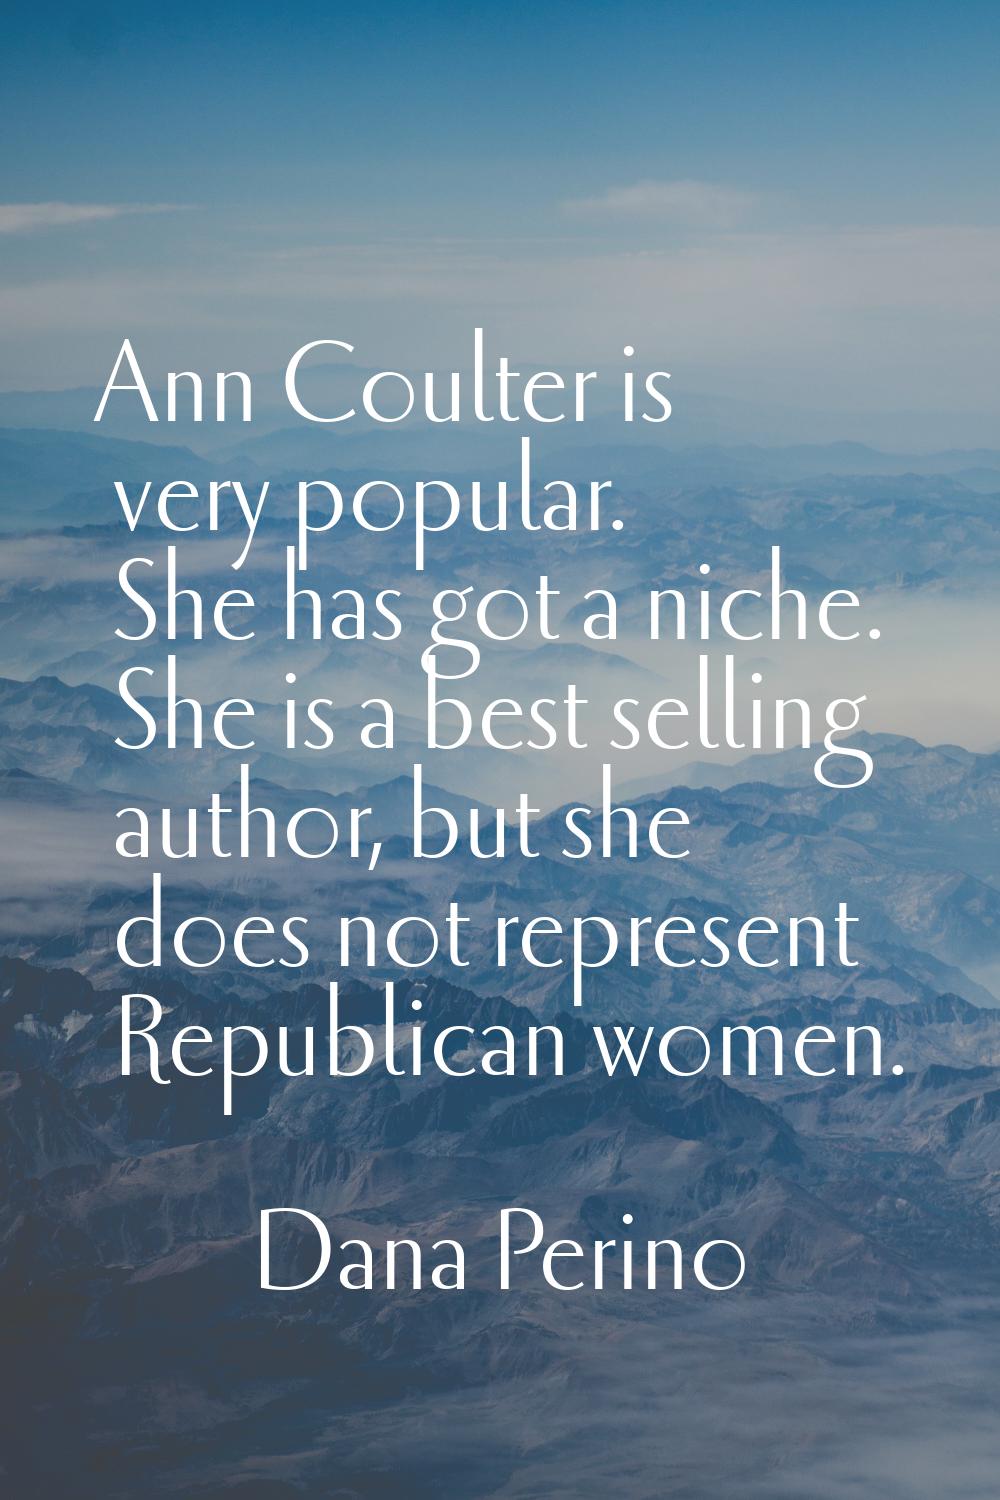 Ann Coulter is very popular. She has got a niche. She is a best selling author, but she does not re